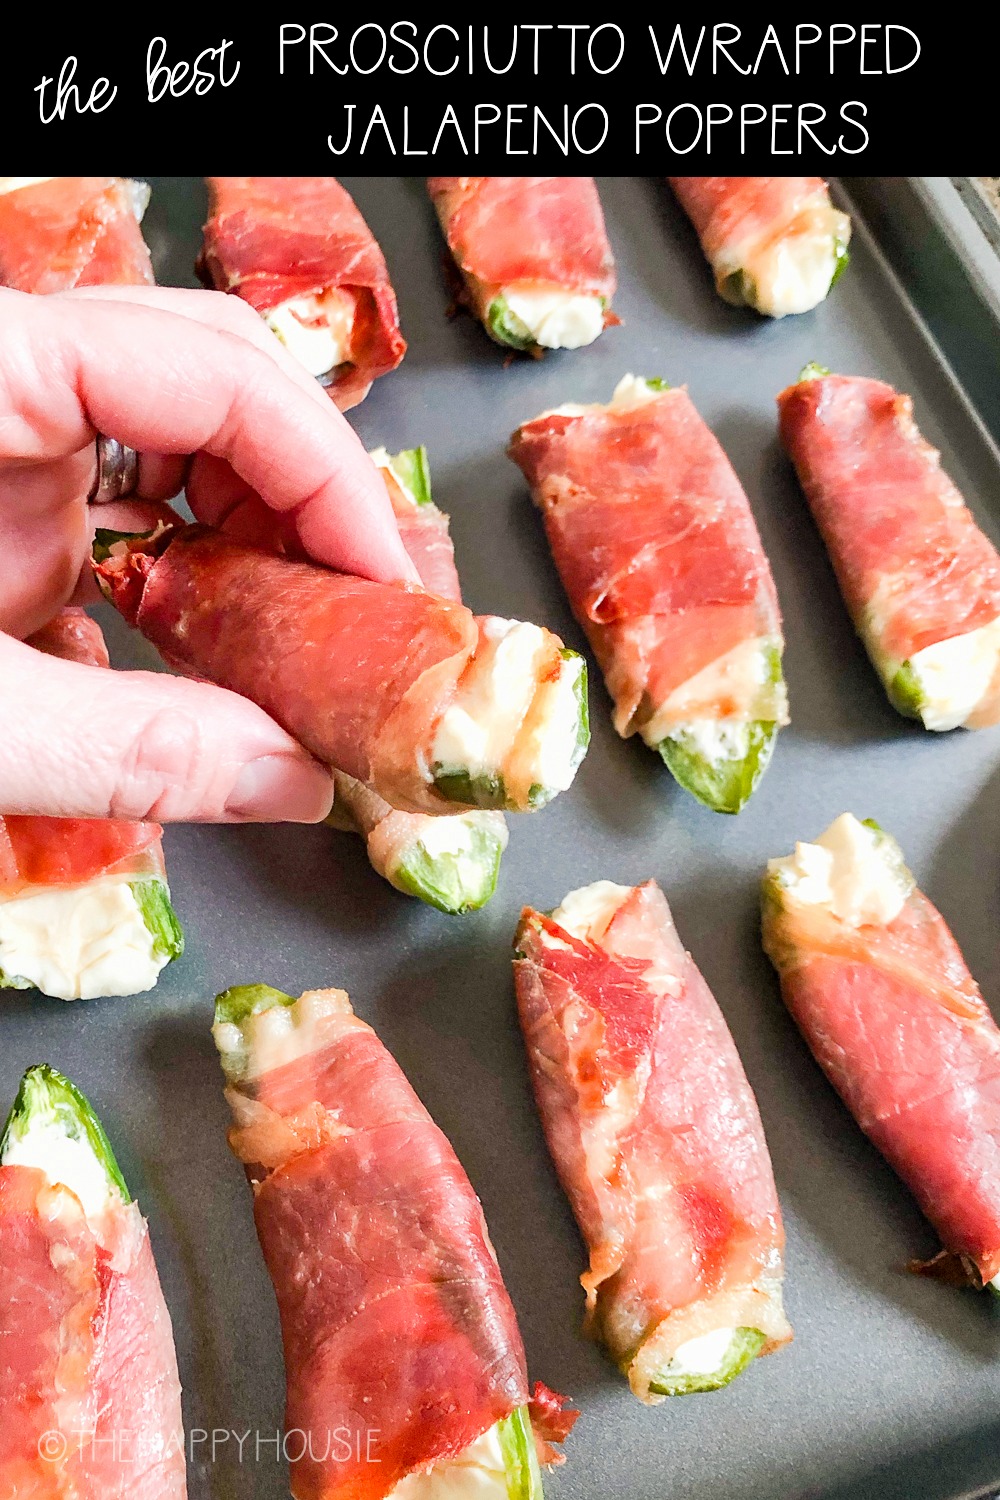 The Best Prosciutto Wrapped Jalapeno Poppers poster.